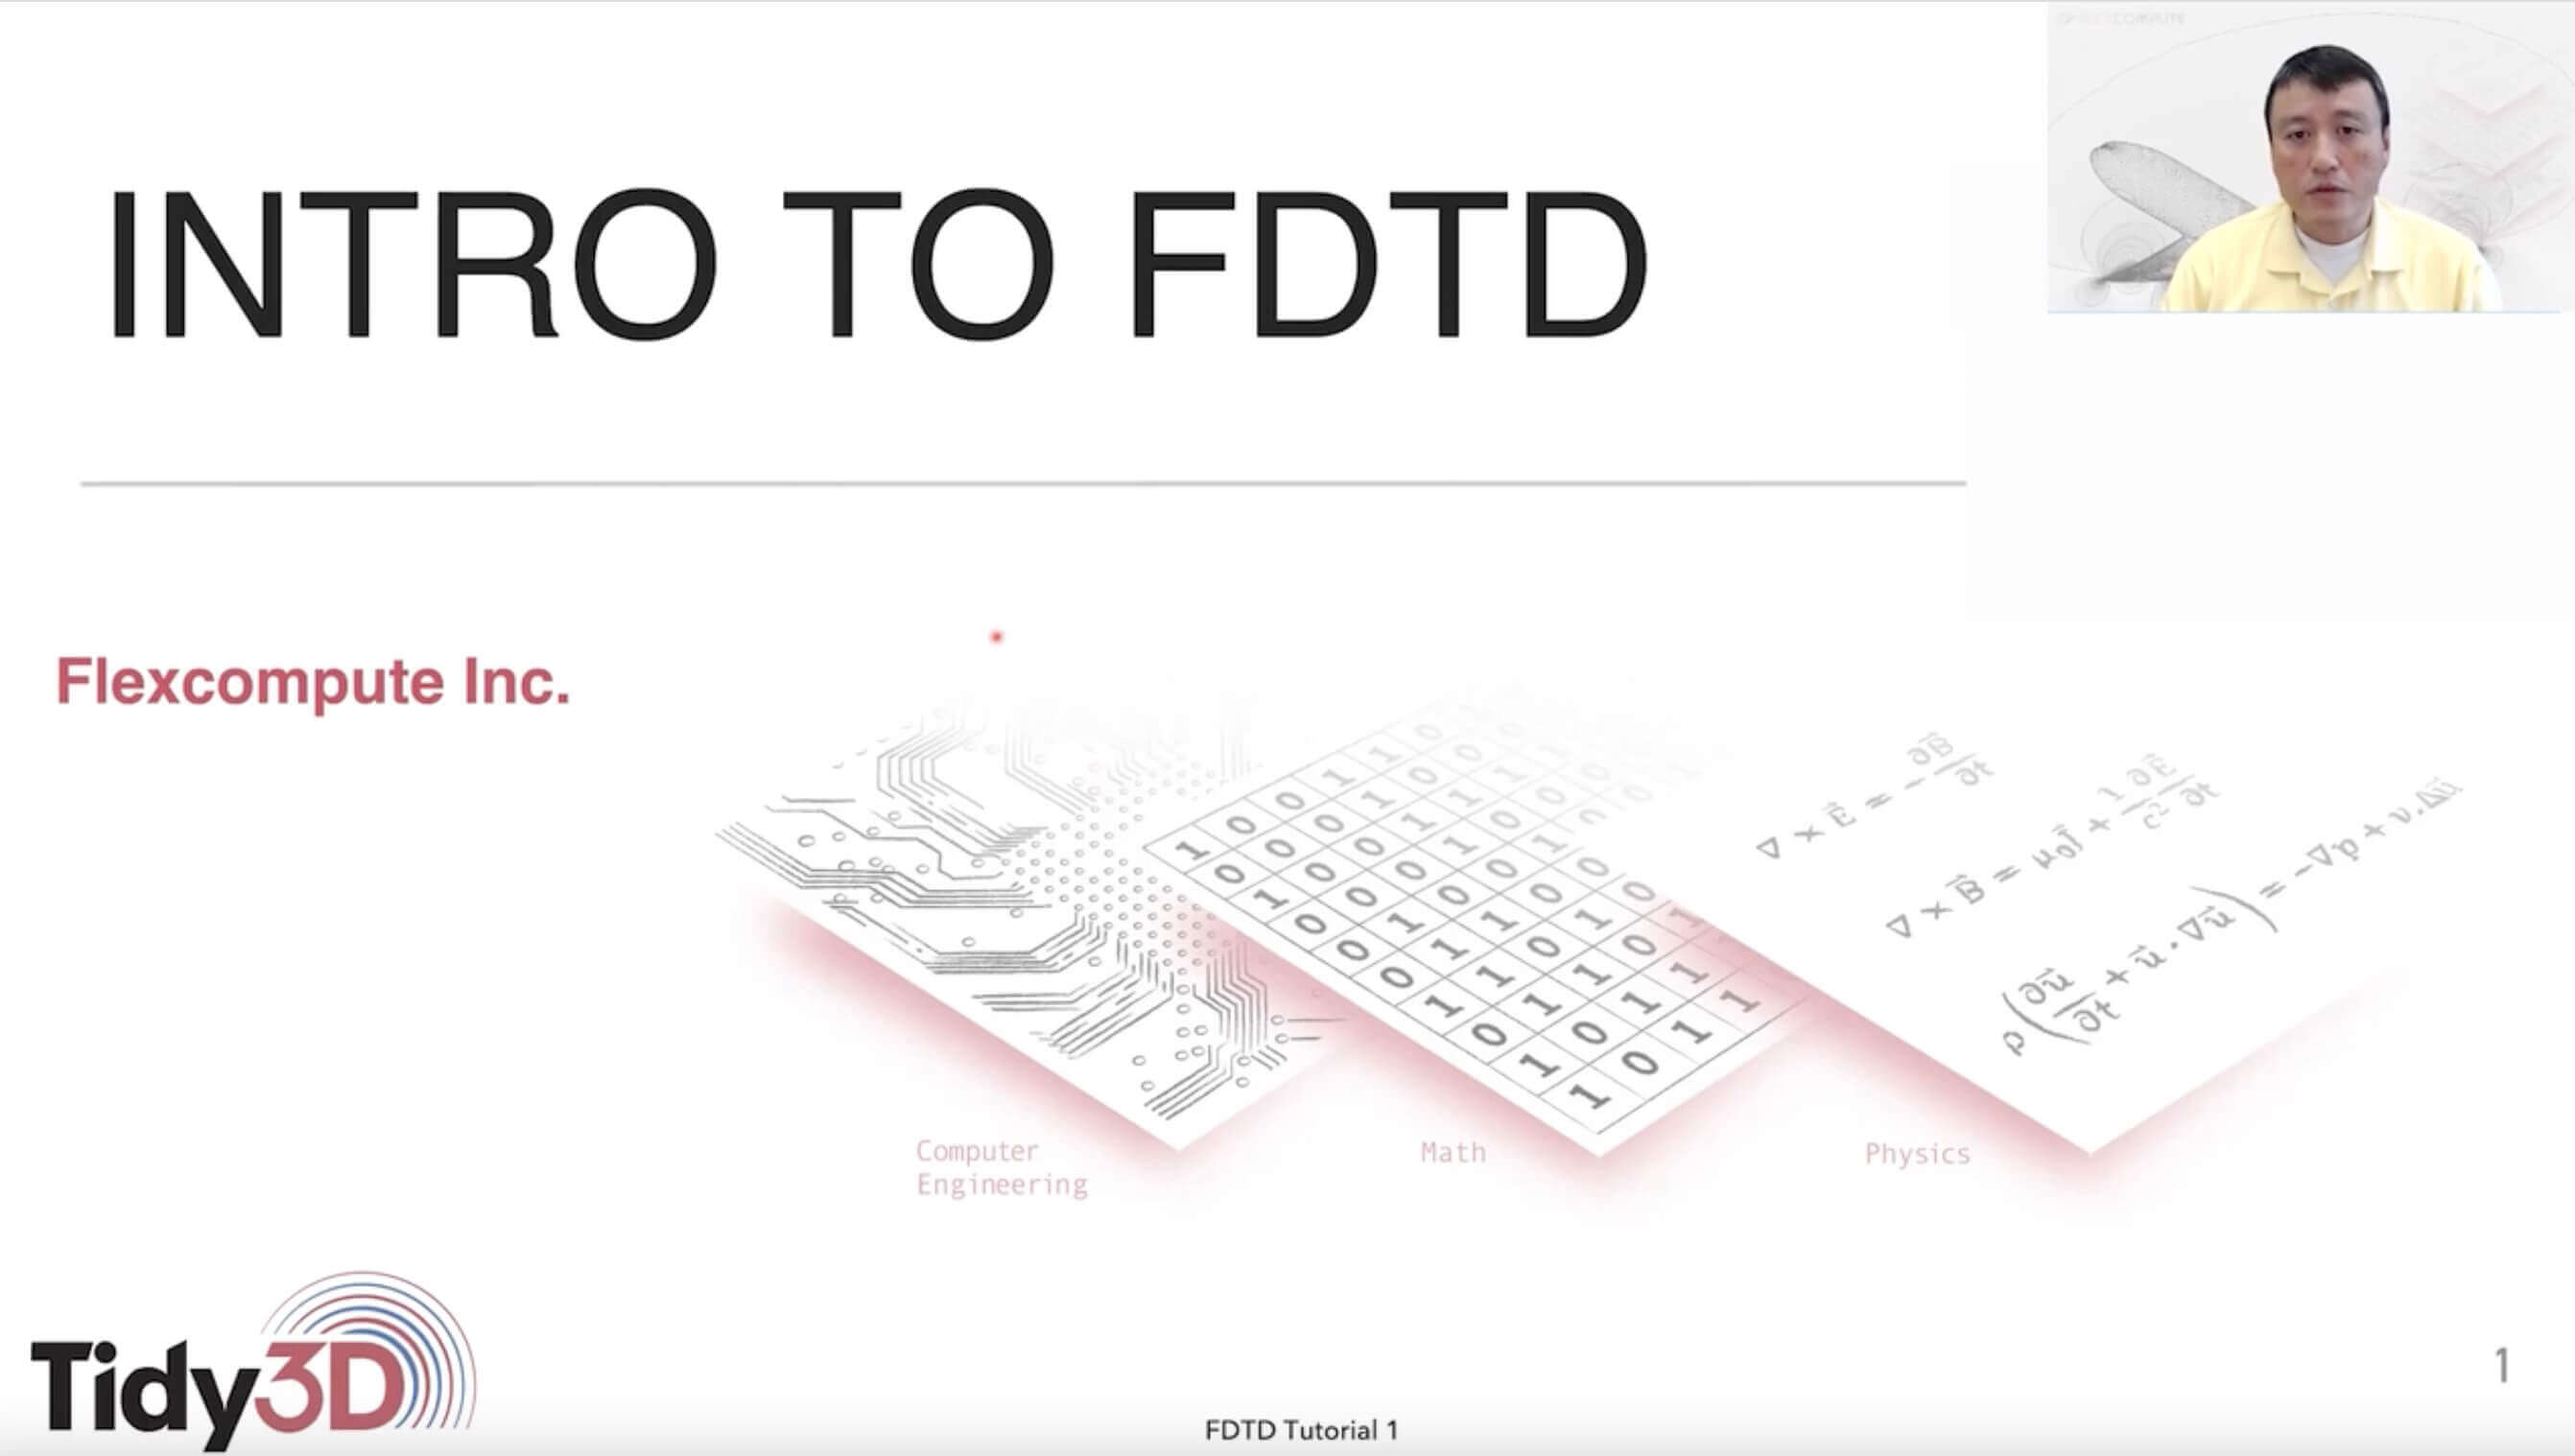 Lecture 1: Introduction to FDTD Simulation